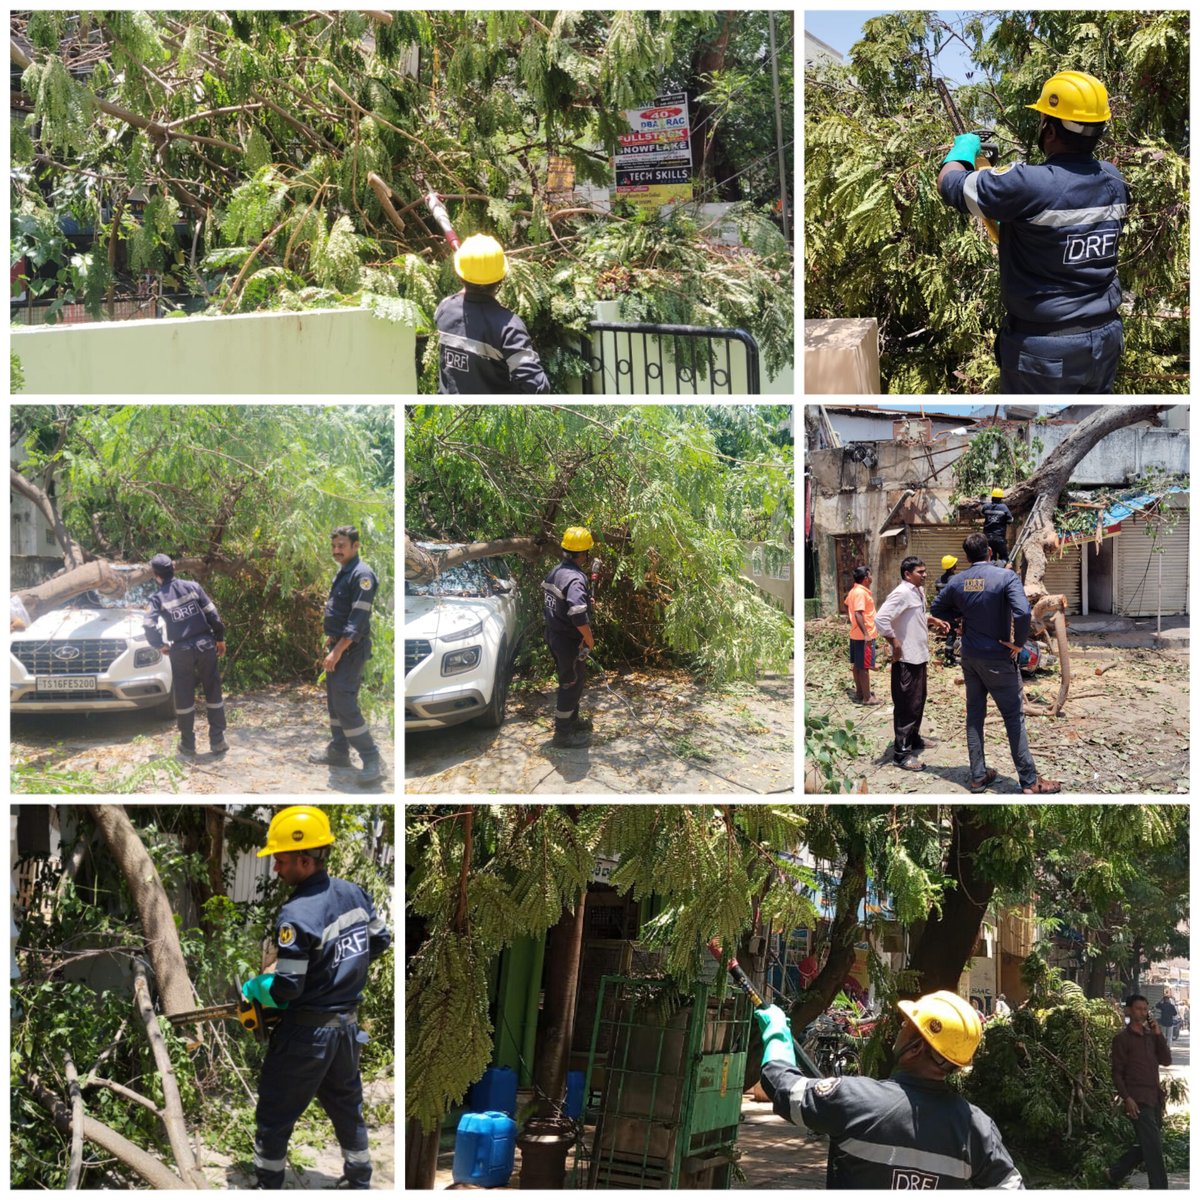 The DRF teams have cleared fallen trees in various places in the city. Citizens may dial 040-21111111 or 9000113667 for GHMC-DRF assistance.@gadwalvijayainc @CommissionrGHMC @GHMCOnline